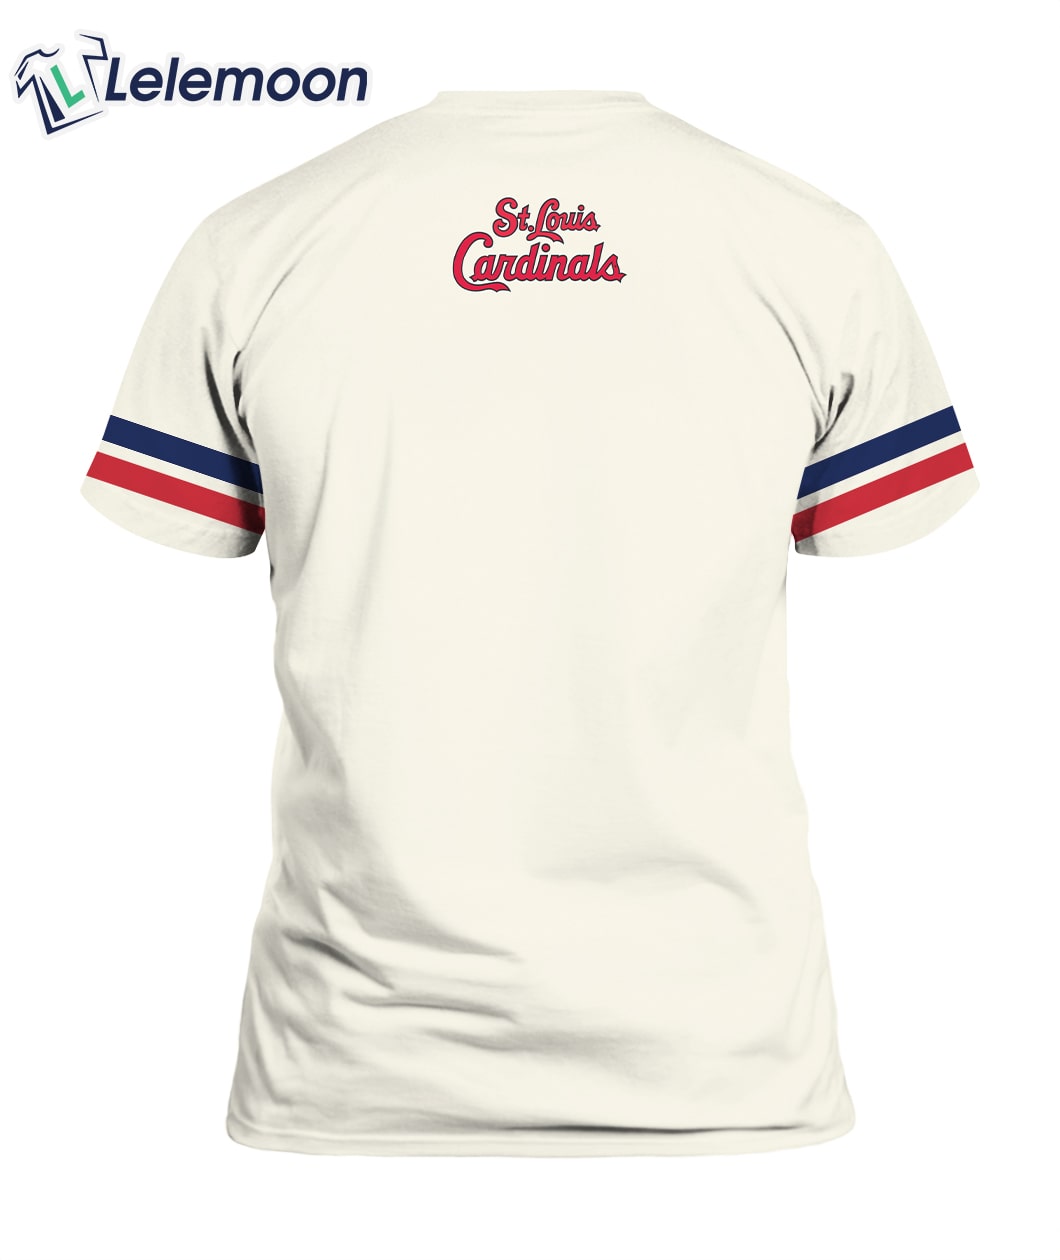 St. Louis Cardinals adding retro jersey for Saturday home games